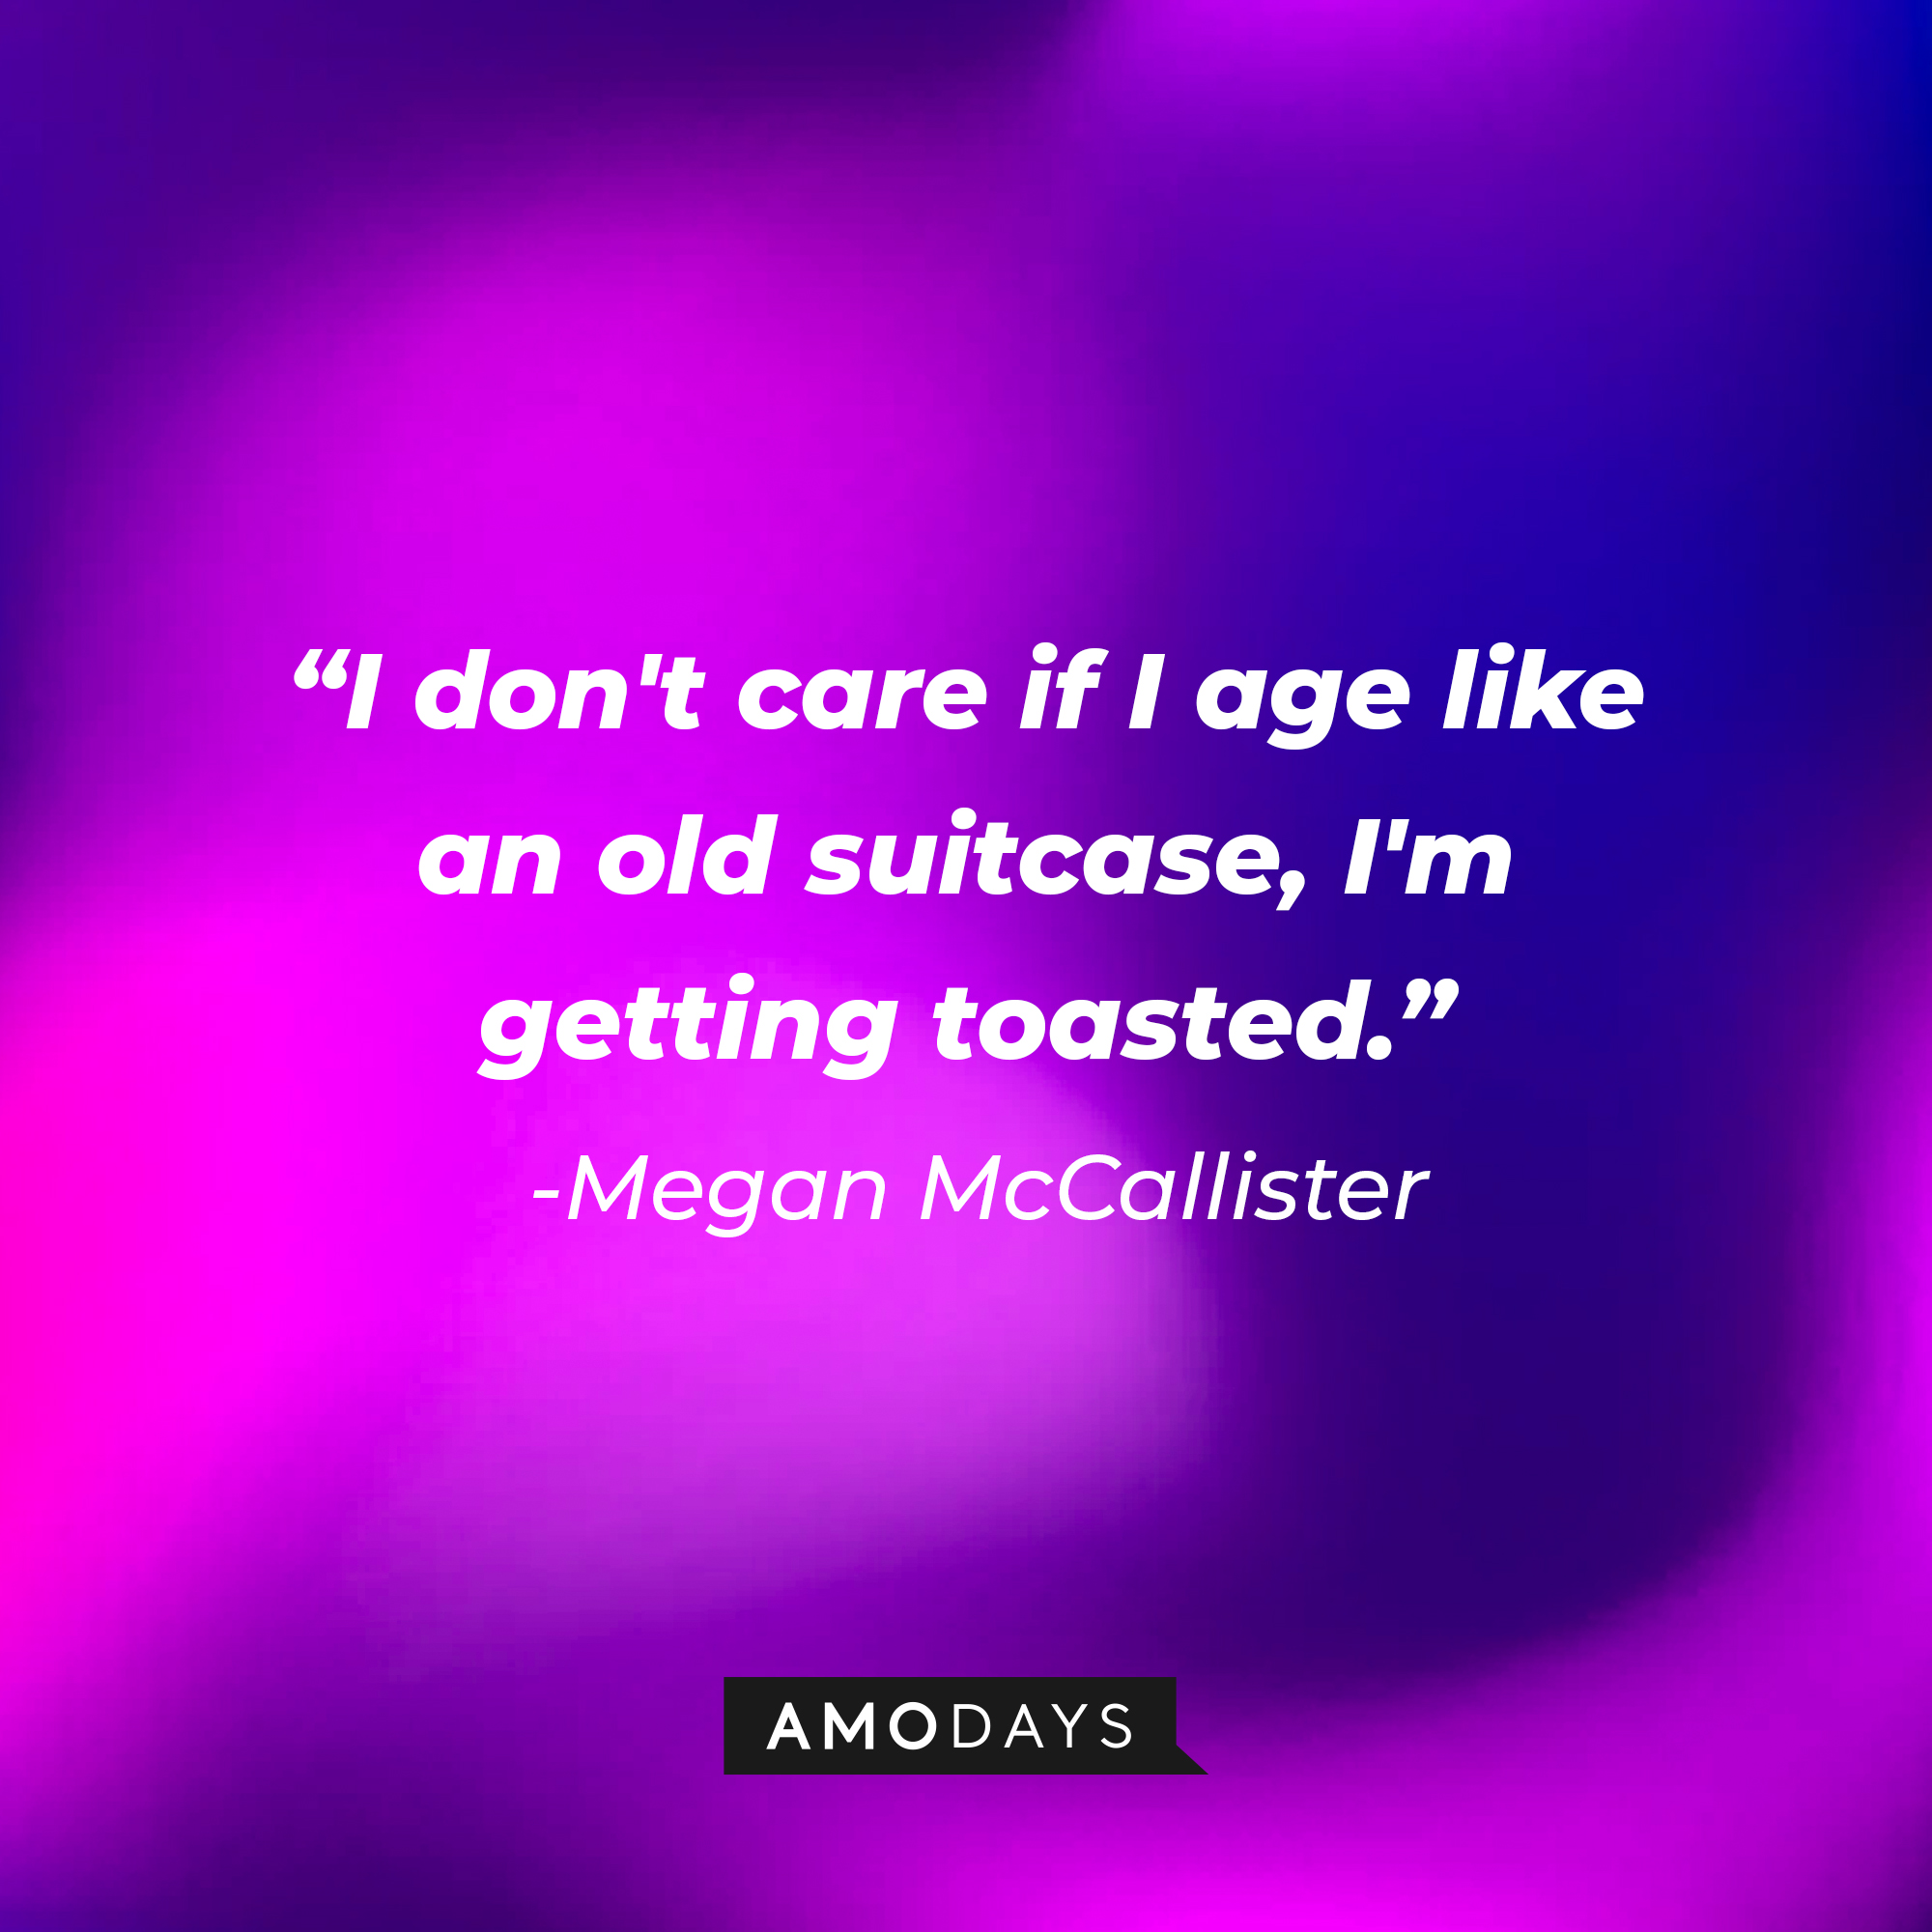 Megan McCallister's quote: "I don't care if I age like an old suitcase, I'm getting toasted." | Source: AmoDays